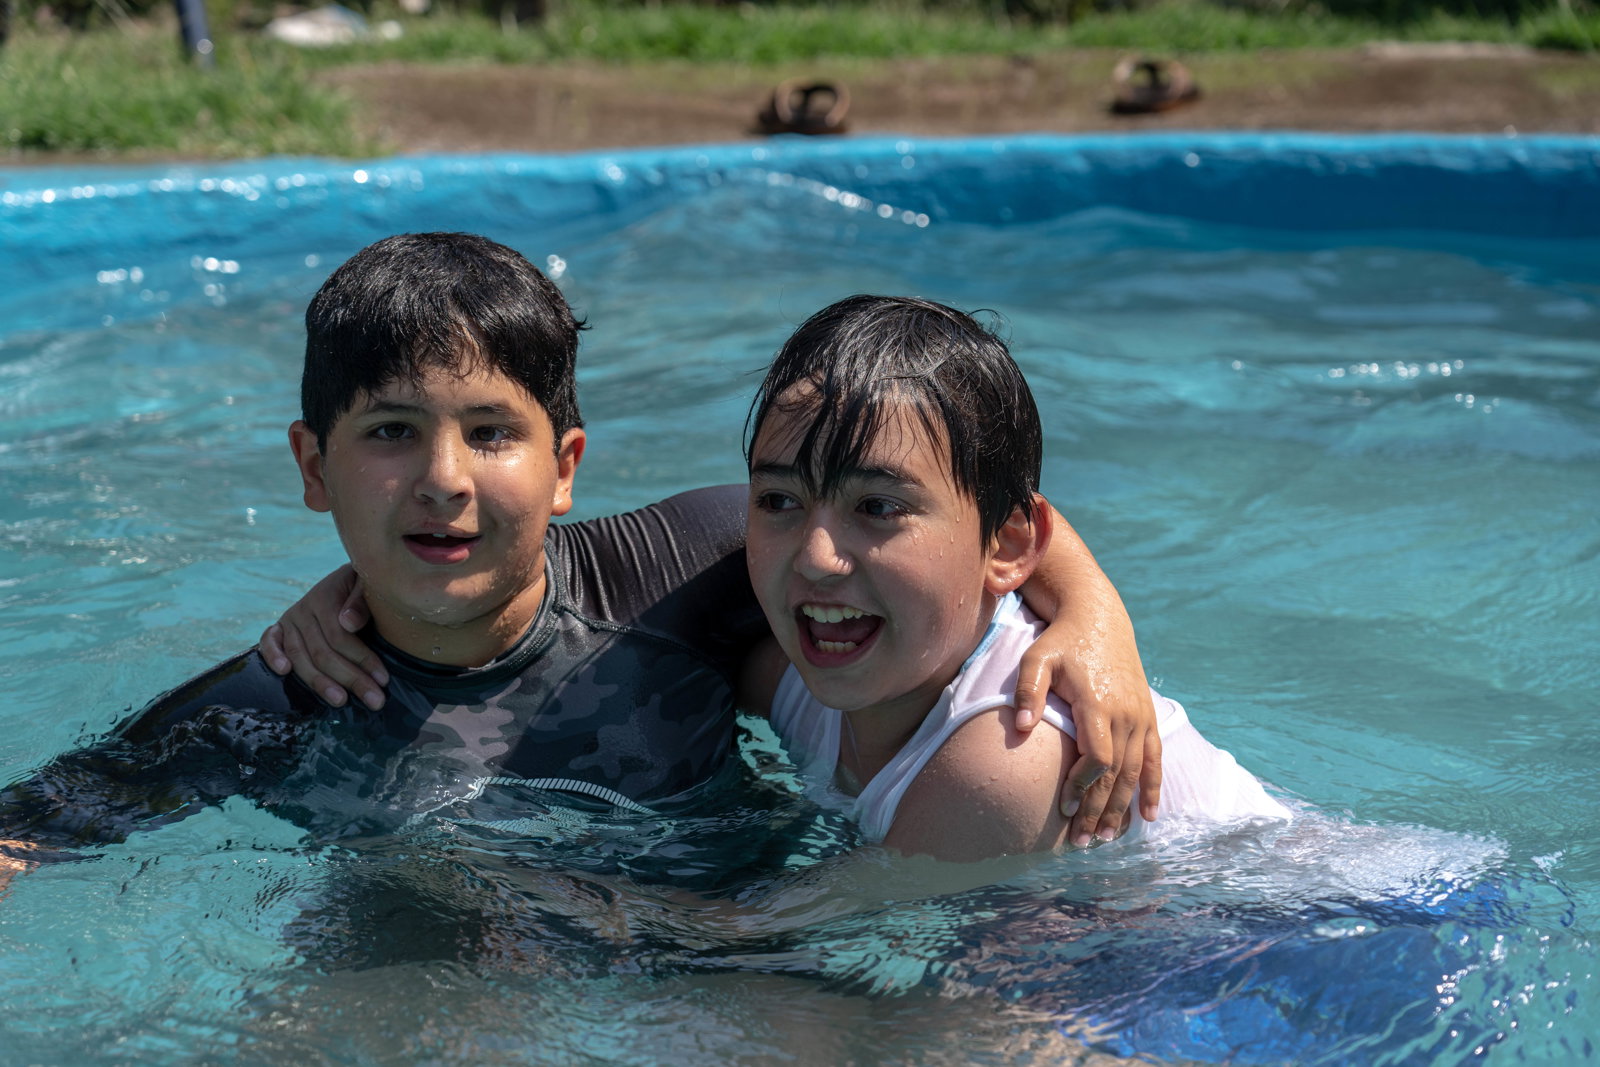 juan and another child with their arms around one another as they play in a pool.